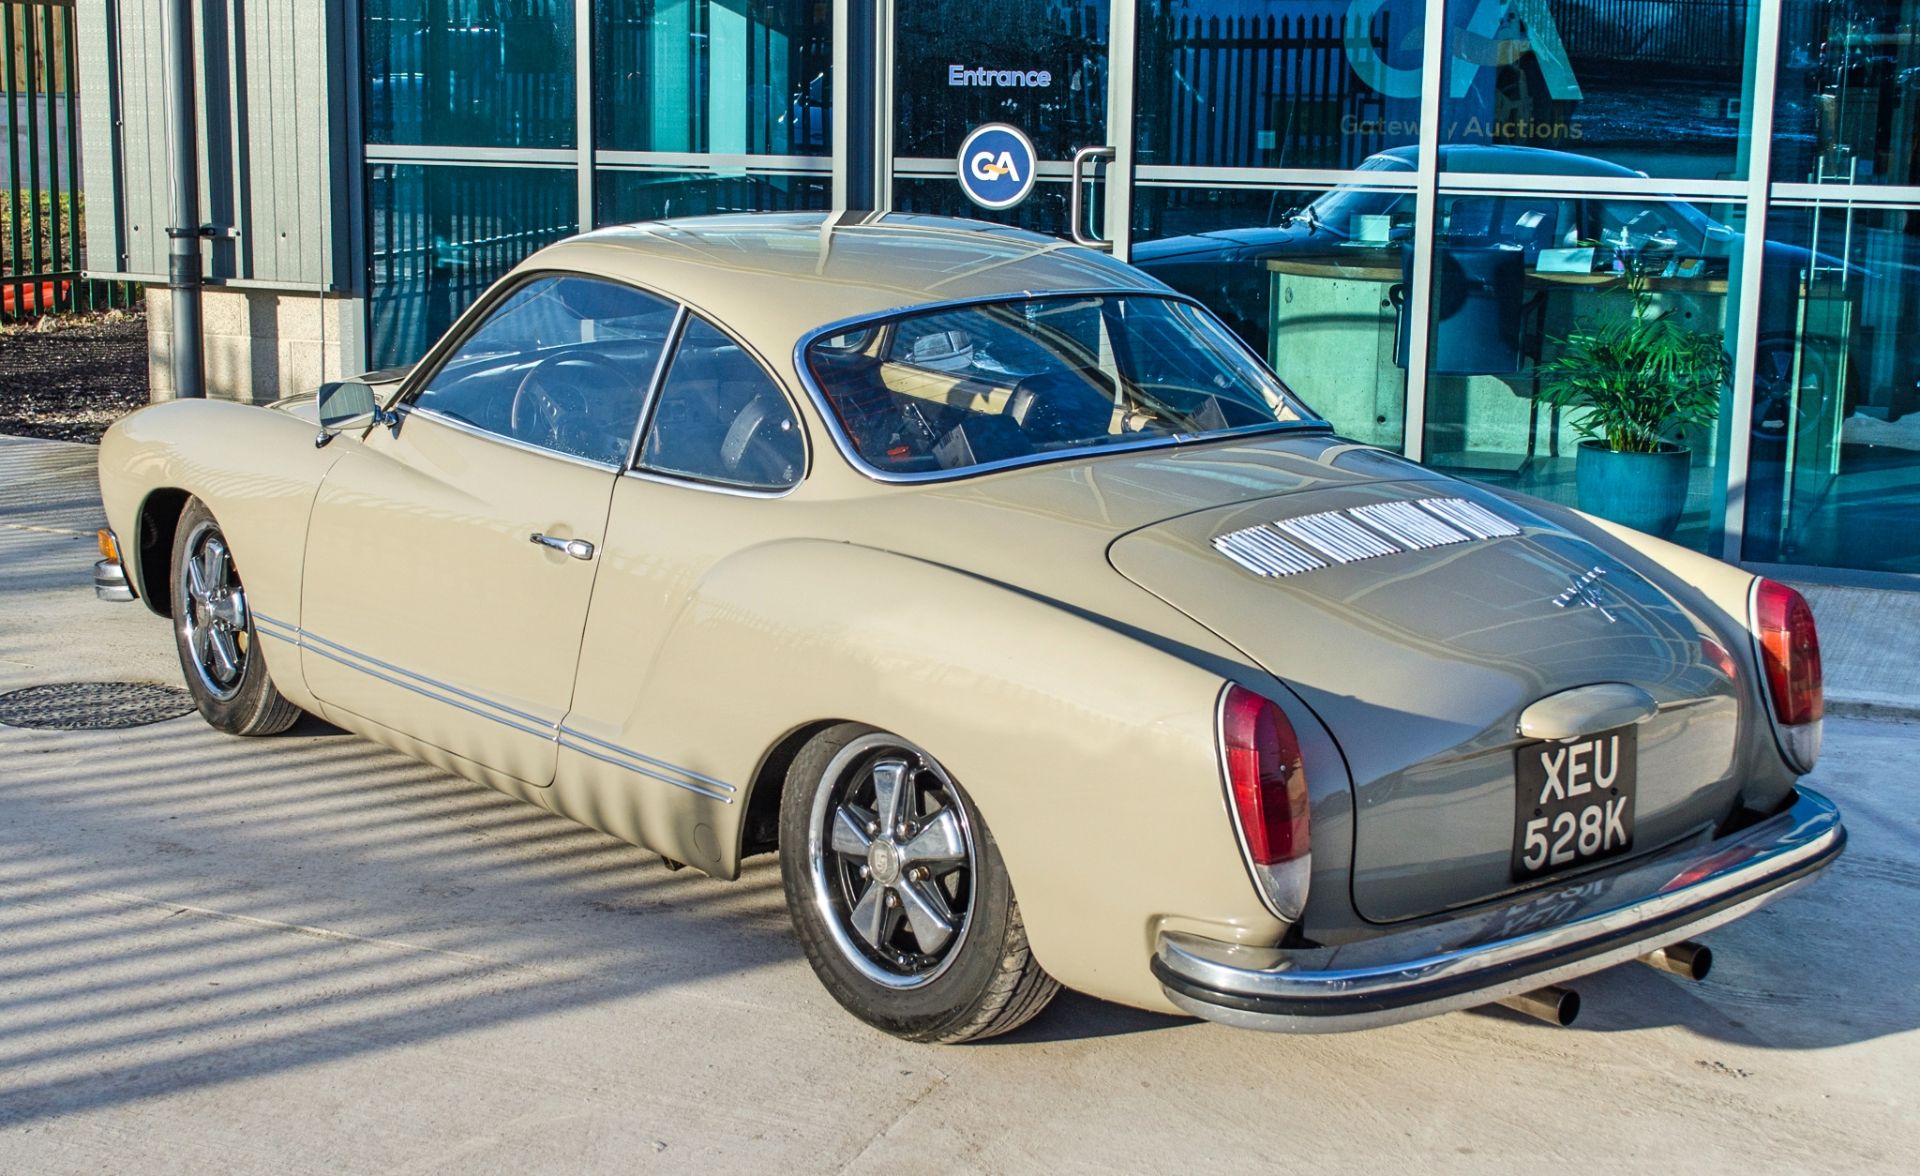 1972 Volkswagen Karmann Ghia 1641cc two door coupe - Image 8 of 52